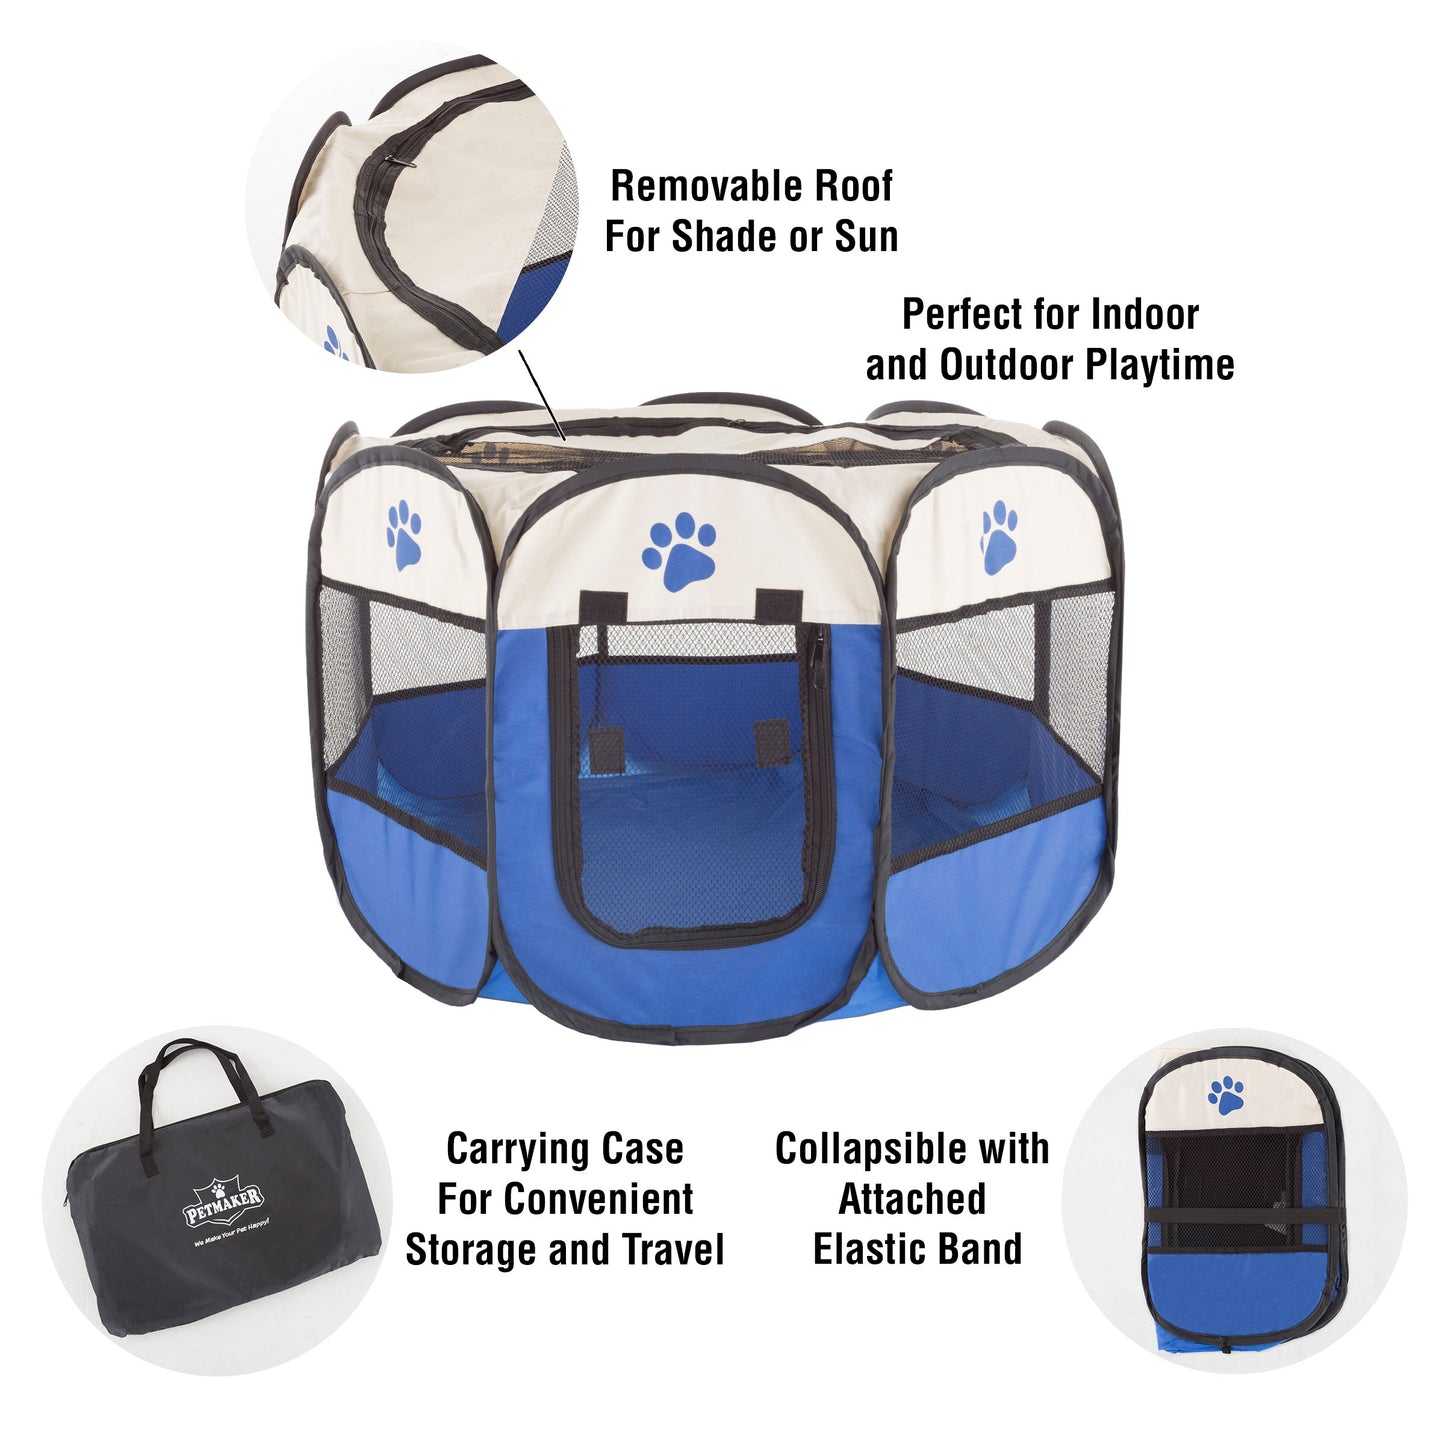 Pop-Up Puppy Playpen and Cat Tent